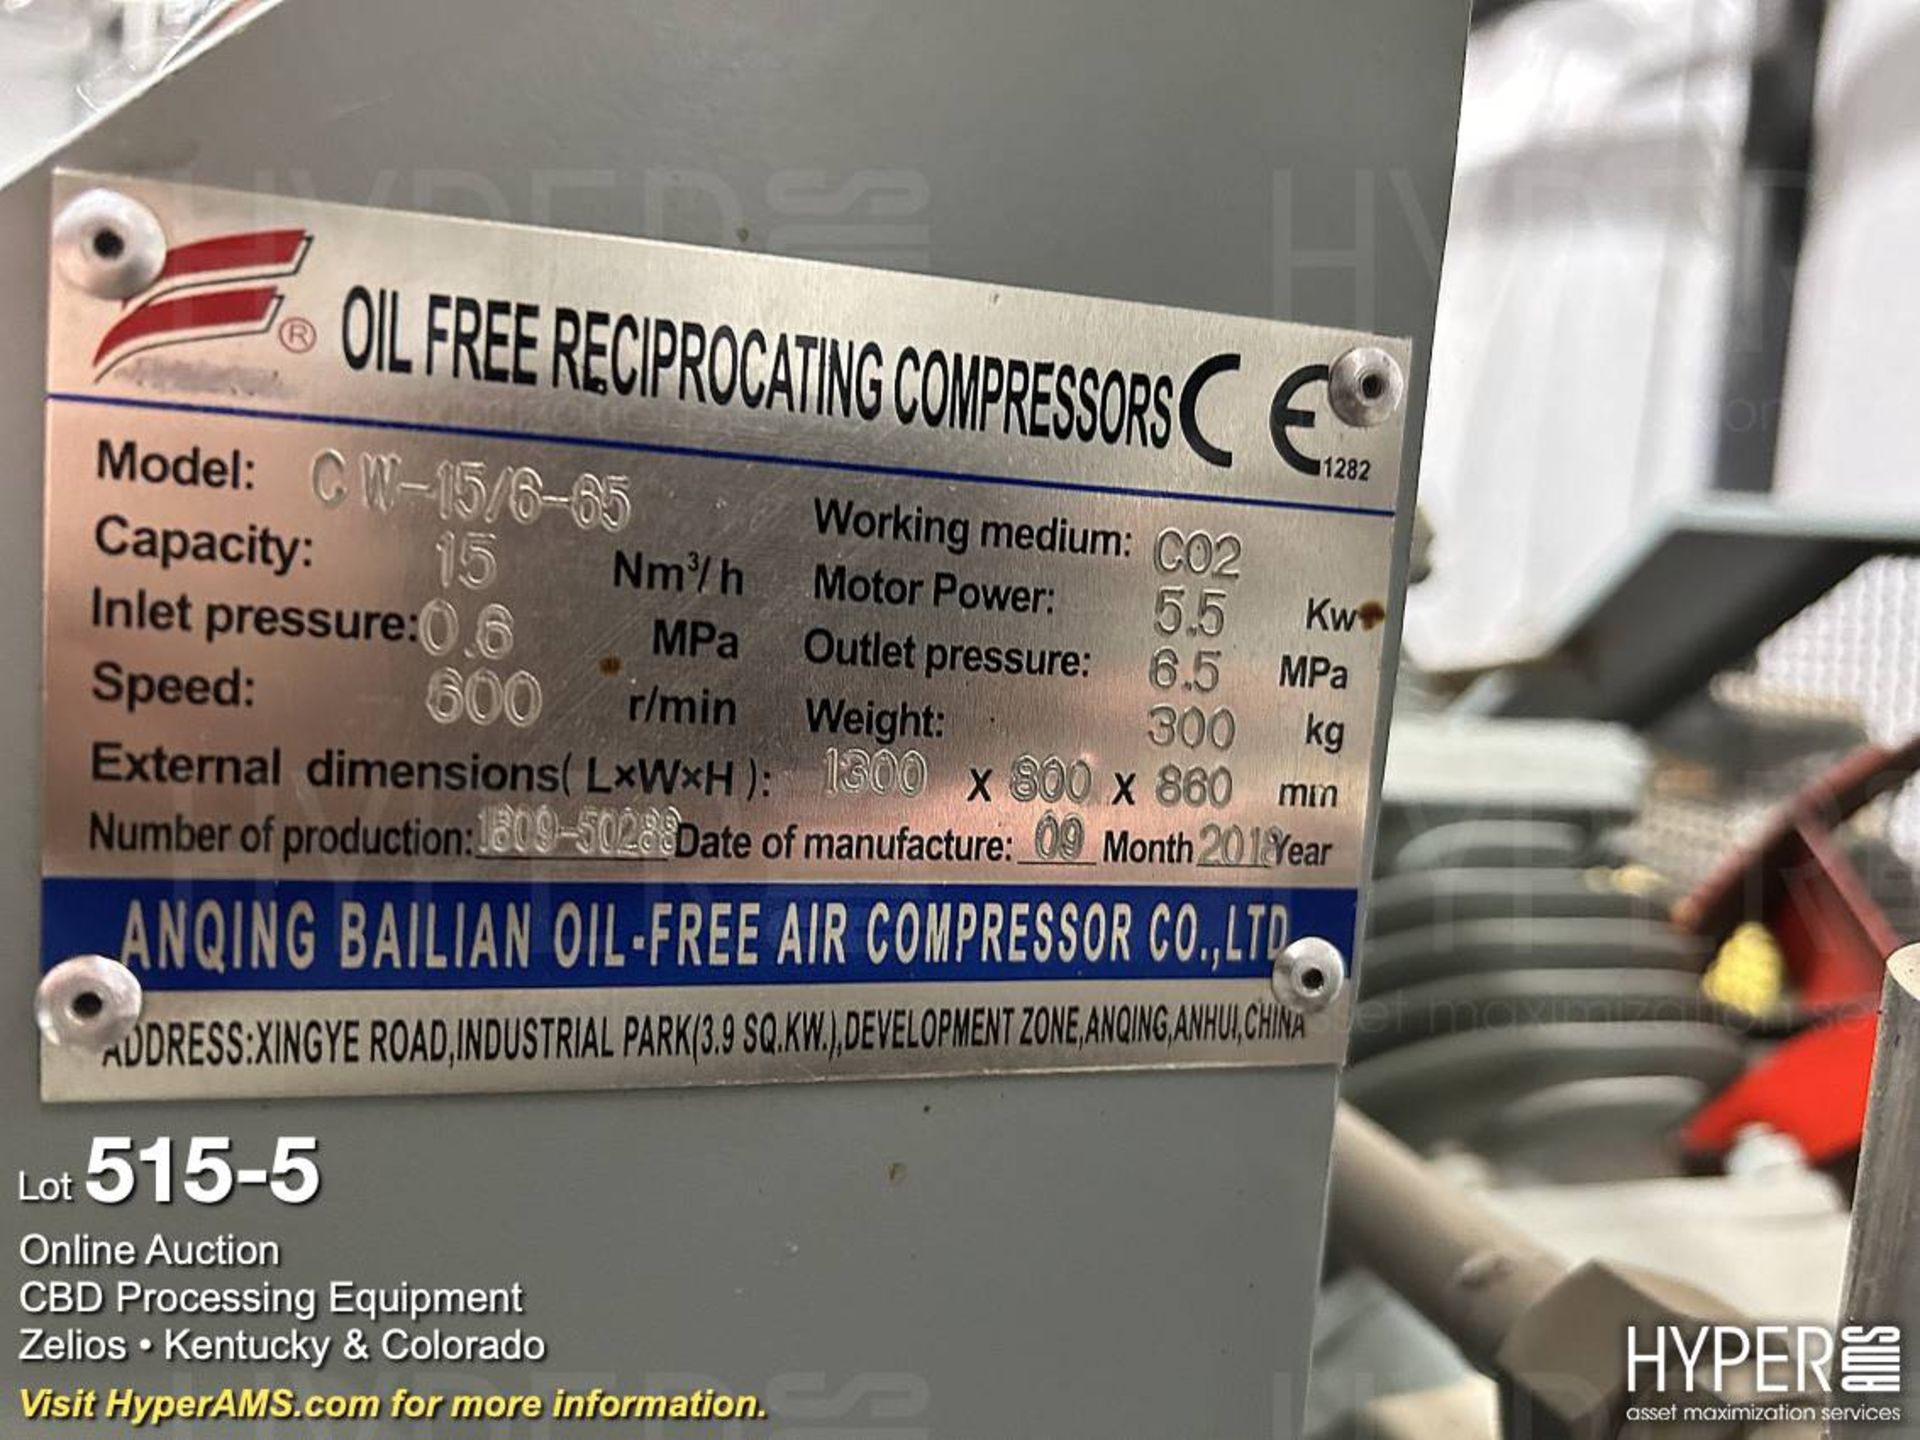 2018 Anqing Bailian Model CW-15/6-65 Oil Free Reciprocating Carbon Dioxide Compressor - Image 5 of 6